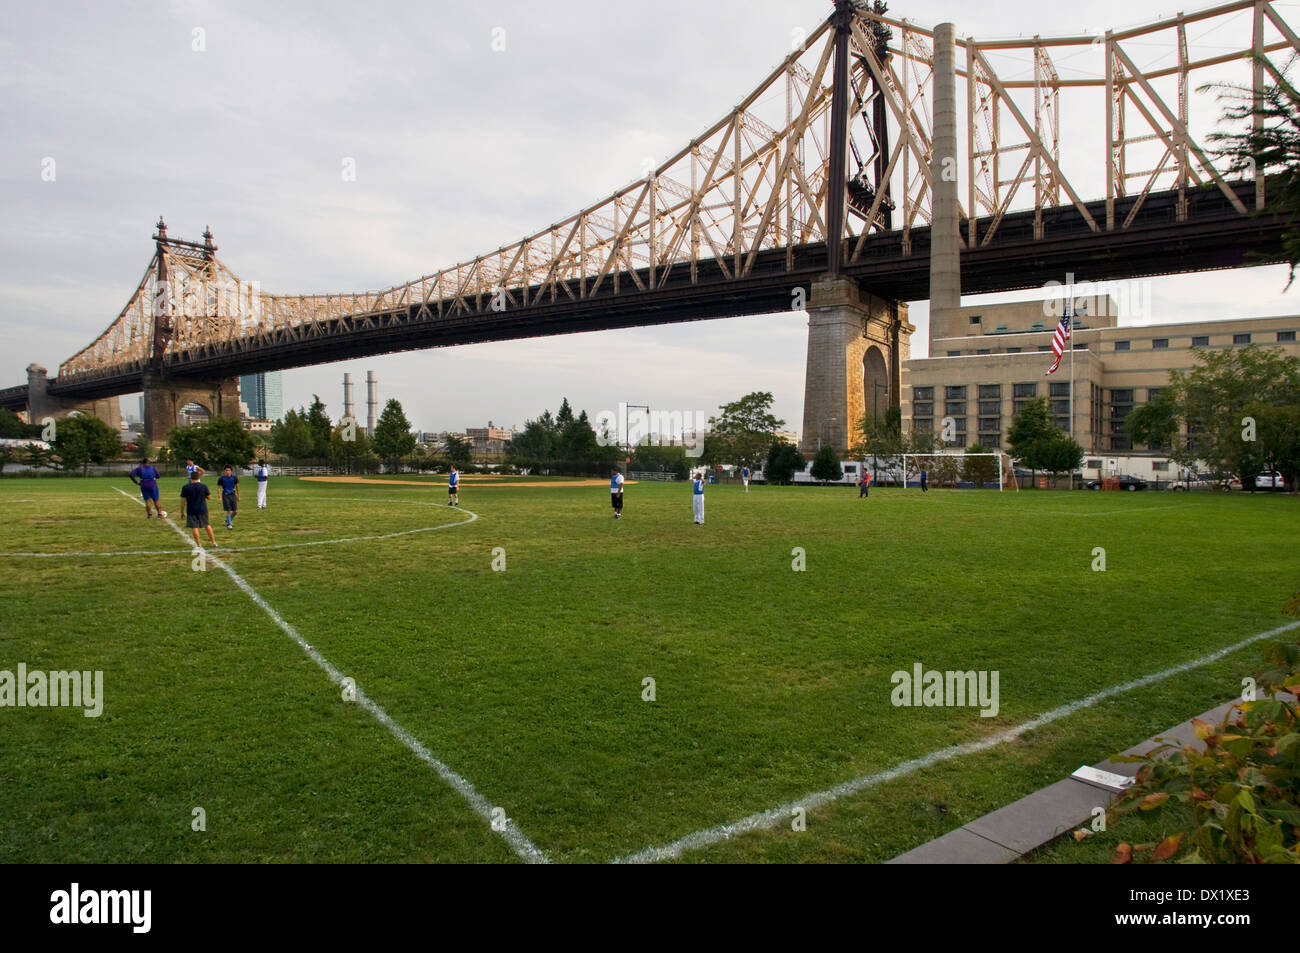 Soccer field under the Queensboro Bridge on Roosevelt Island . Roosevelt Island is located in the East River between Manhattan Stock Photo